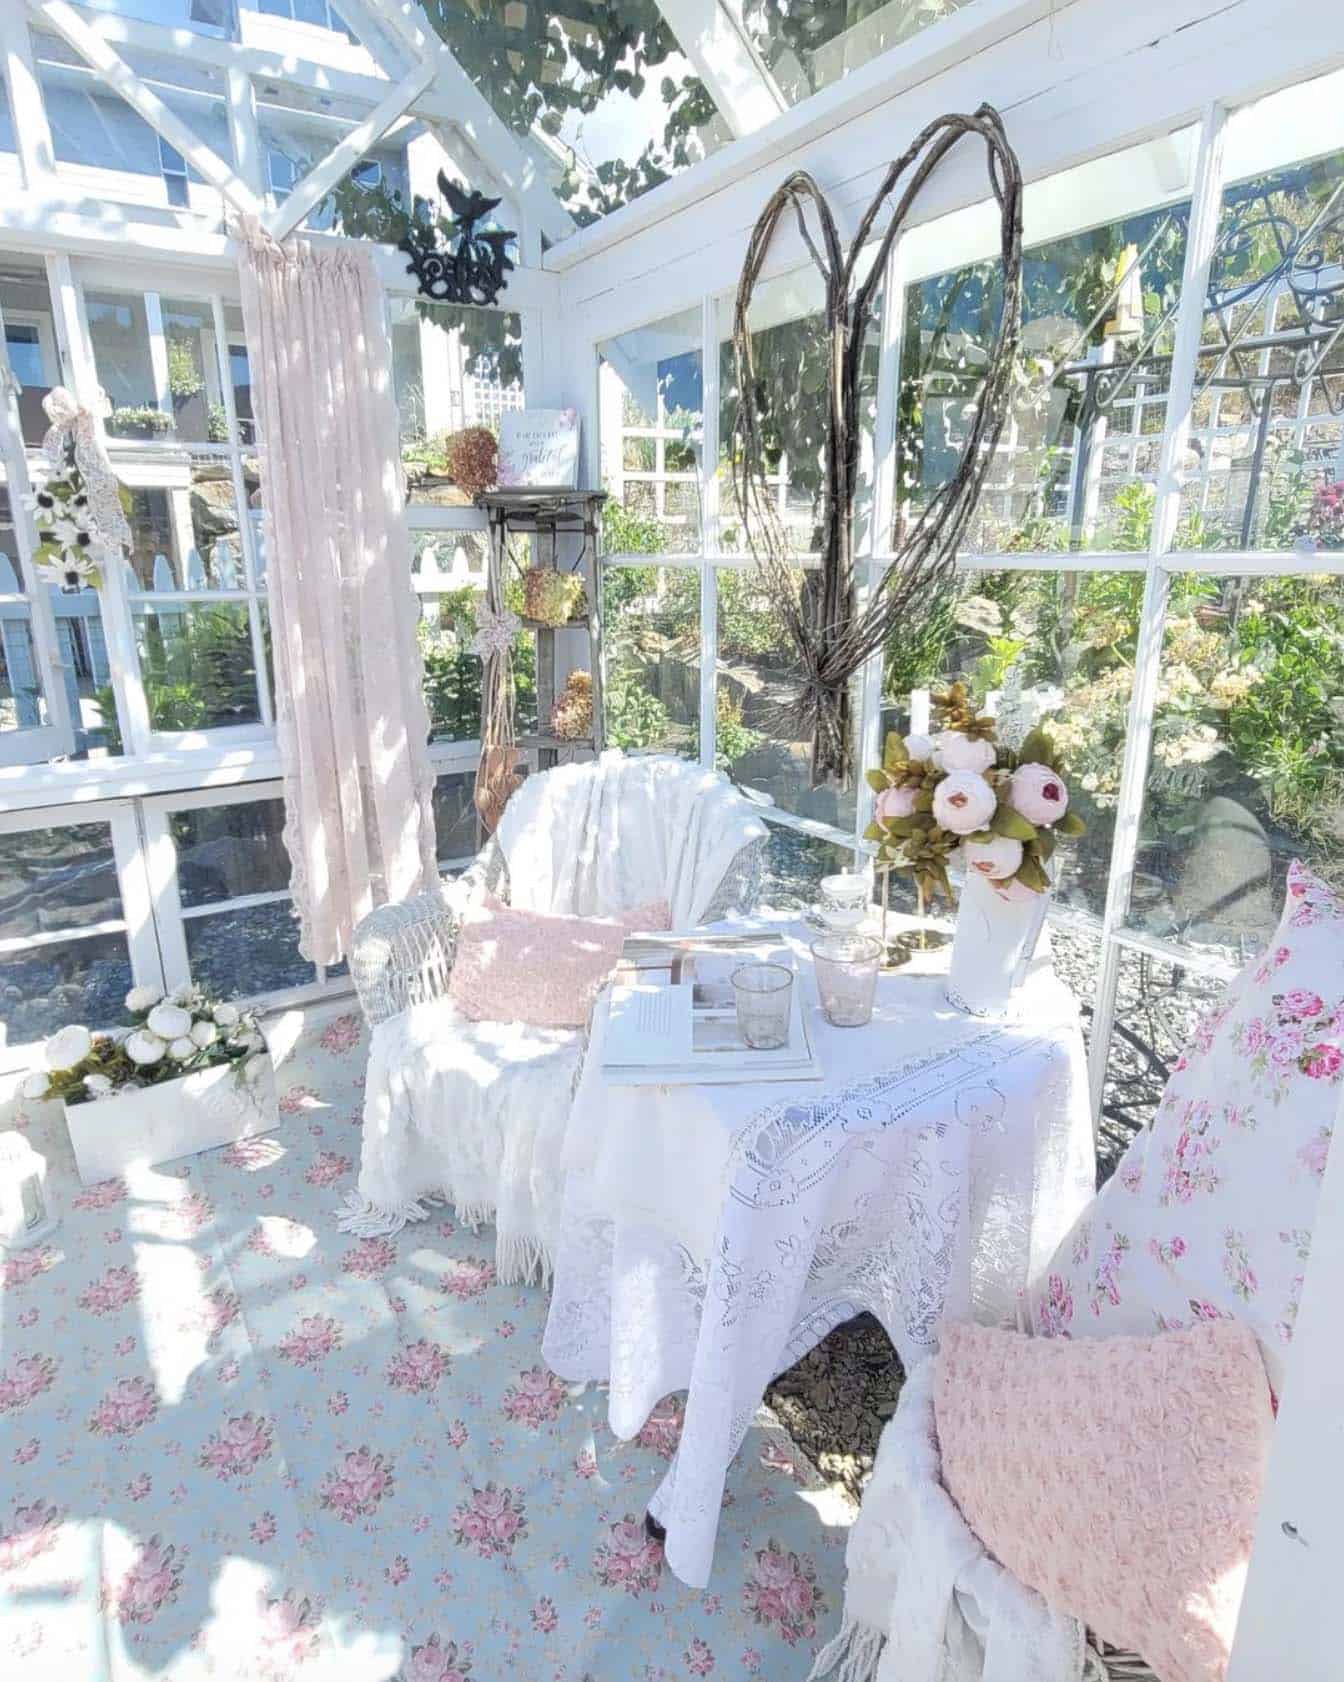 she shed greenhouse decorated in pink and white with a table and chairs